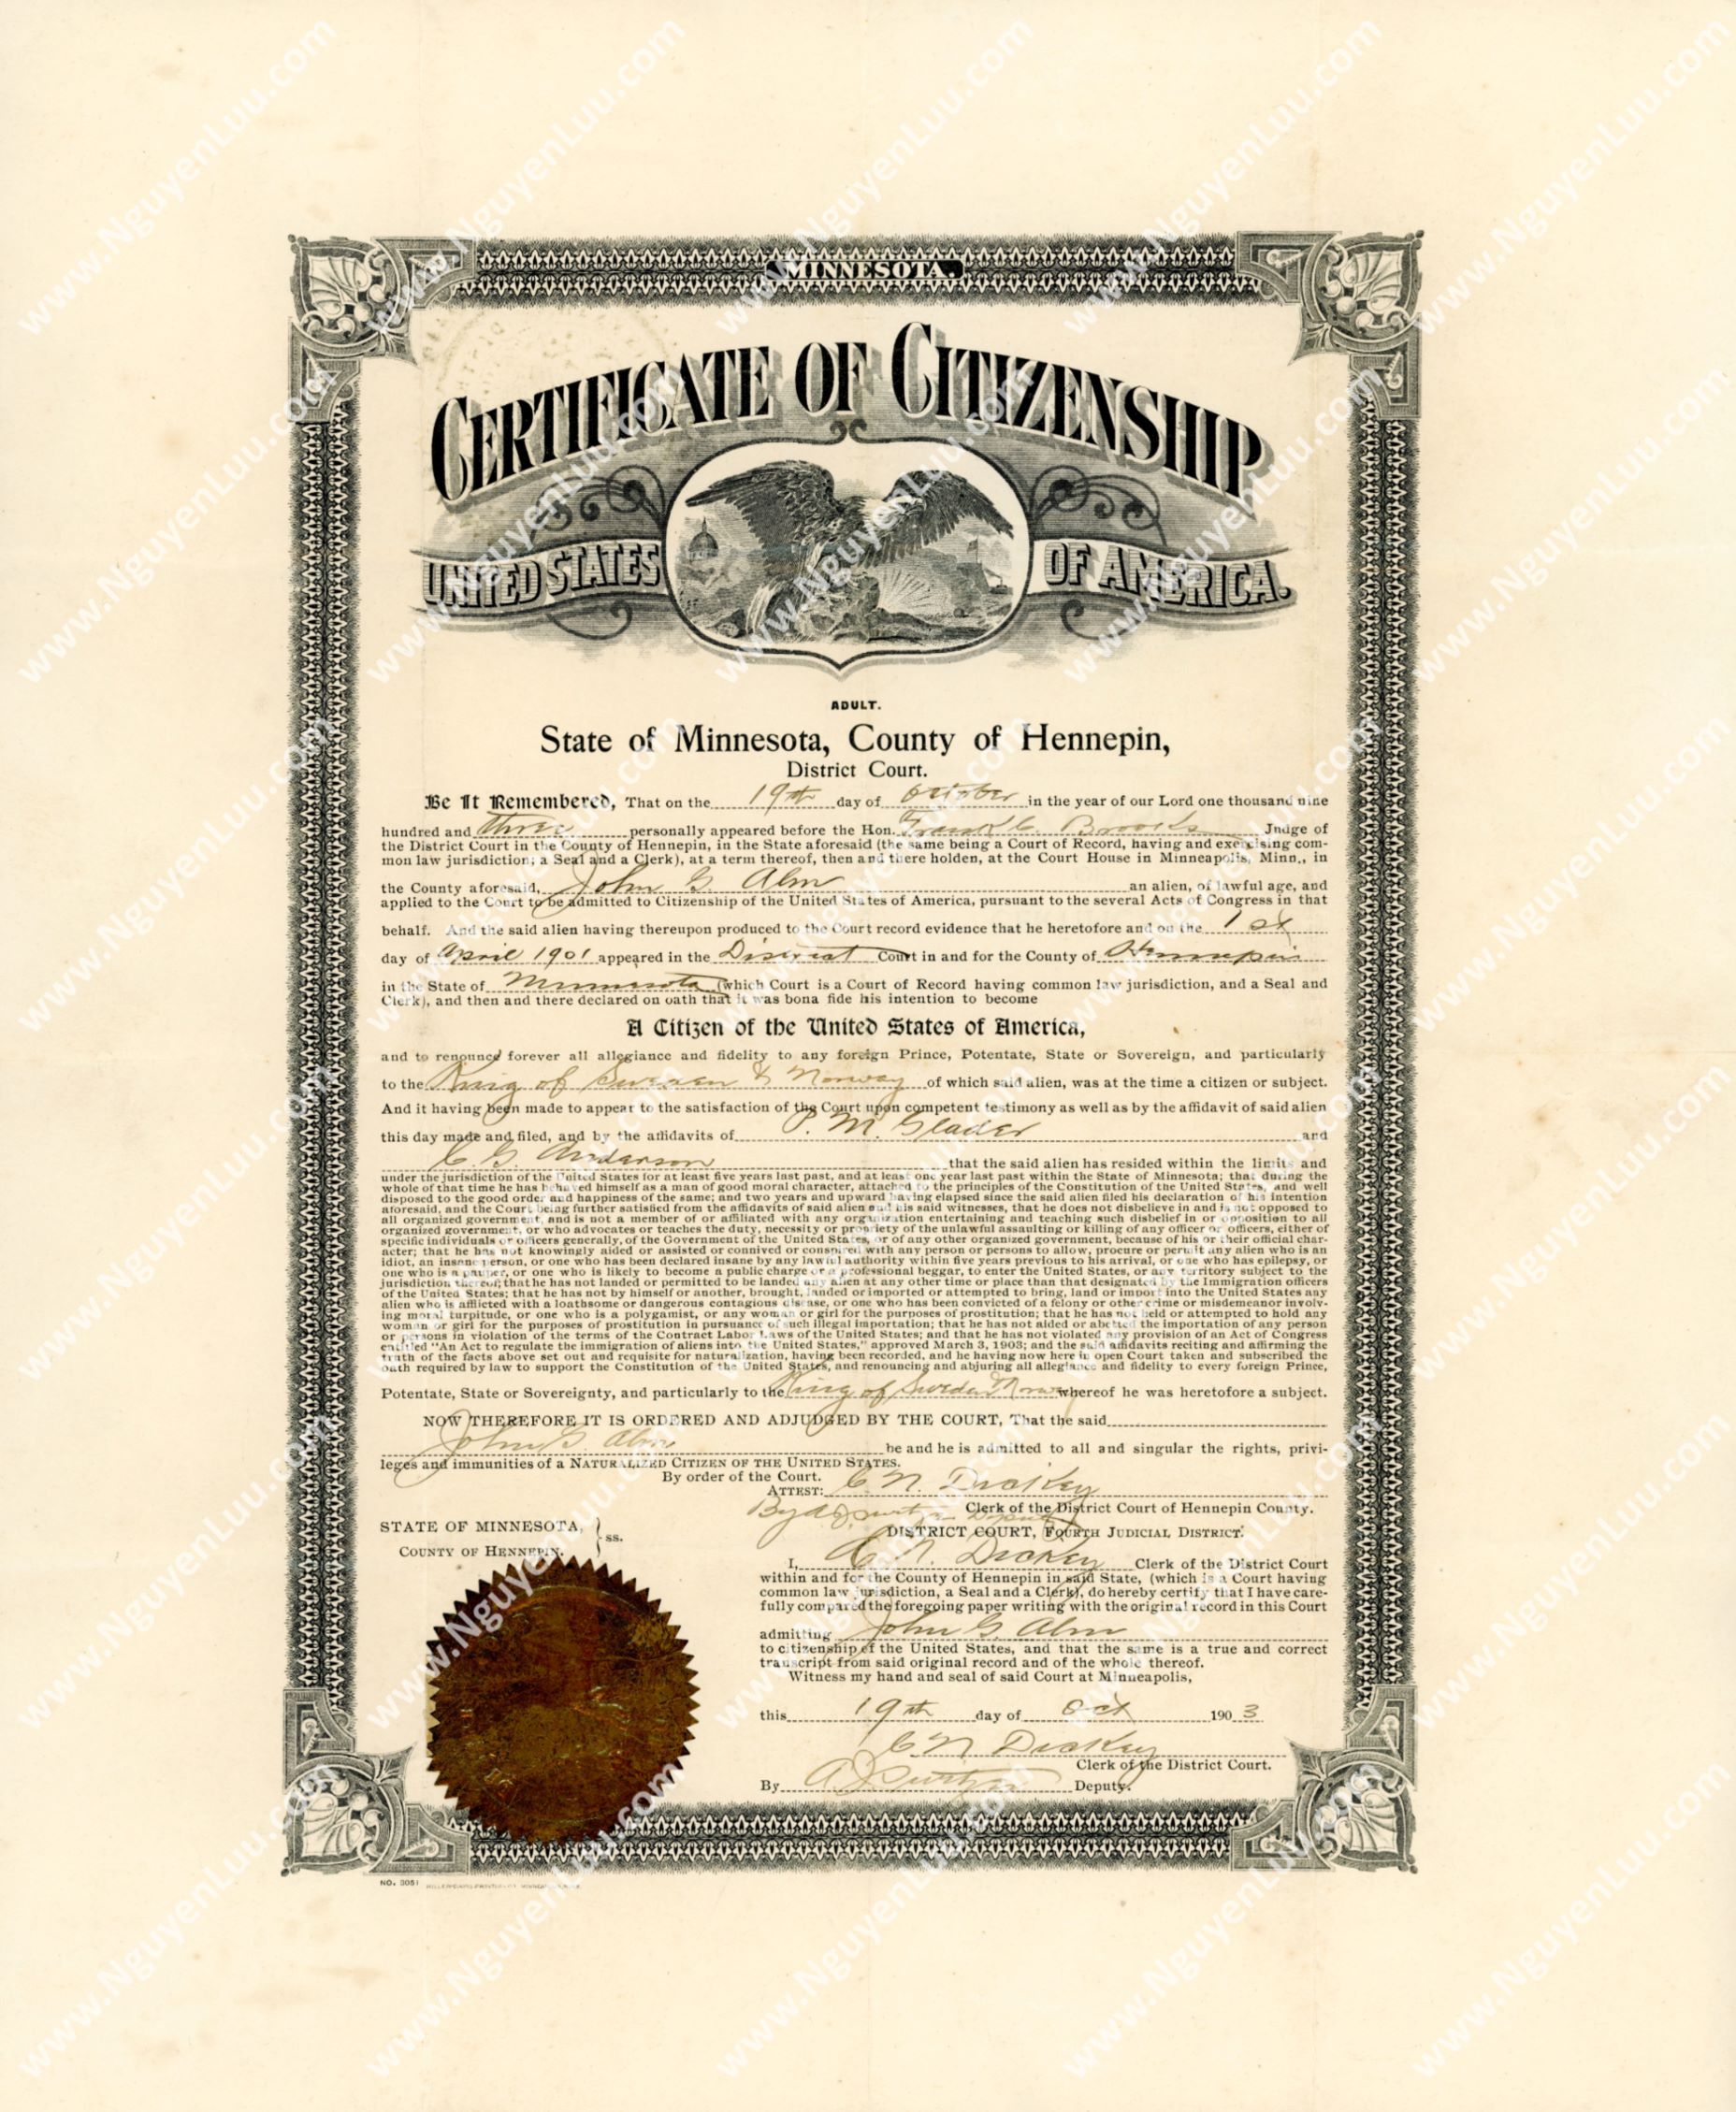 U.S. Certificate of Citizenship issued in the State of Minnesota in 1903